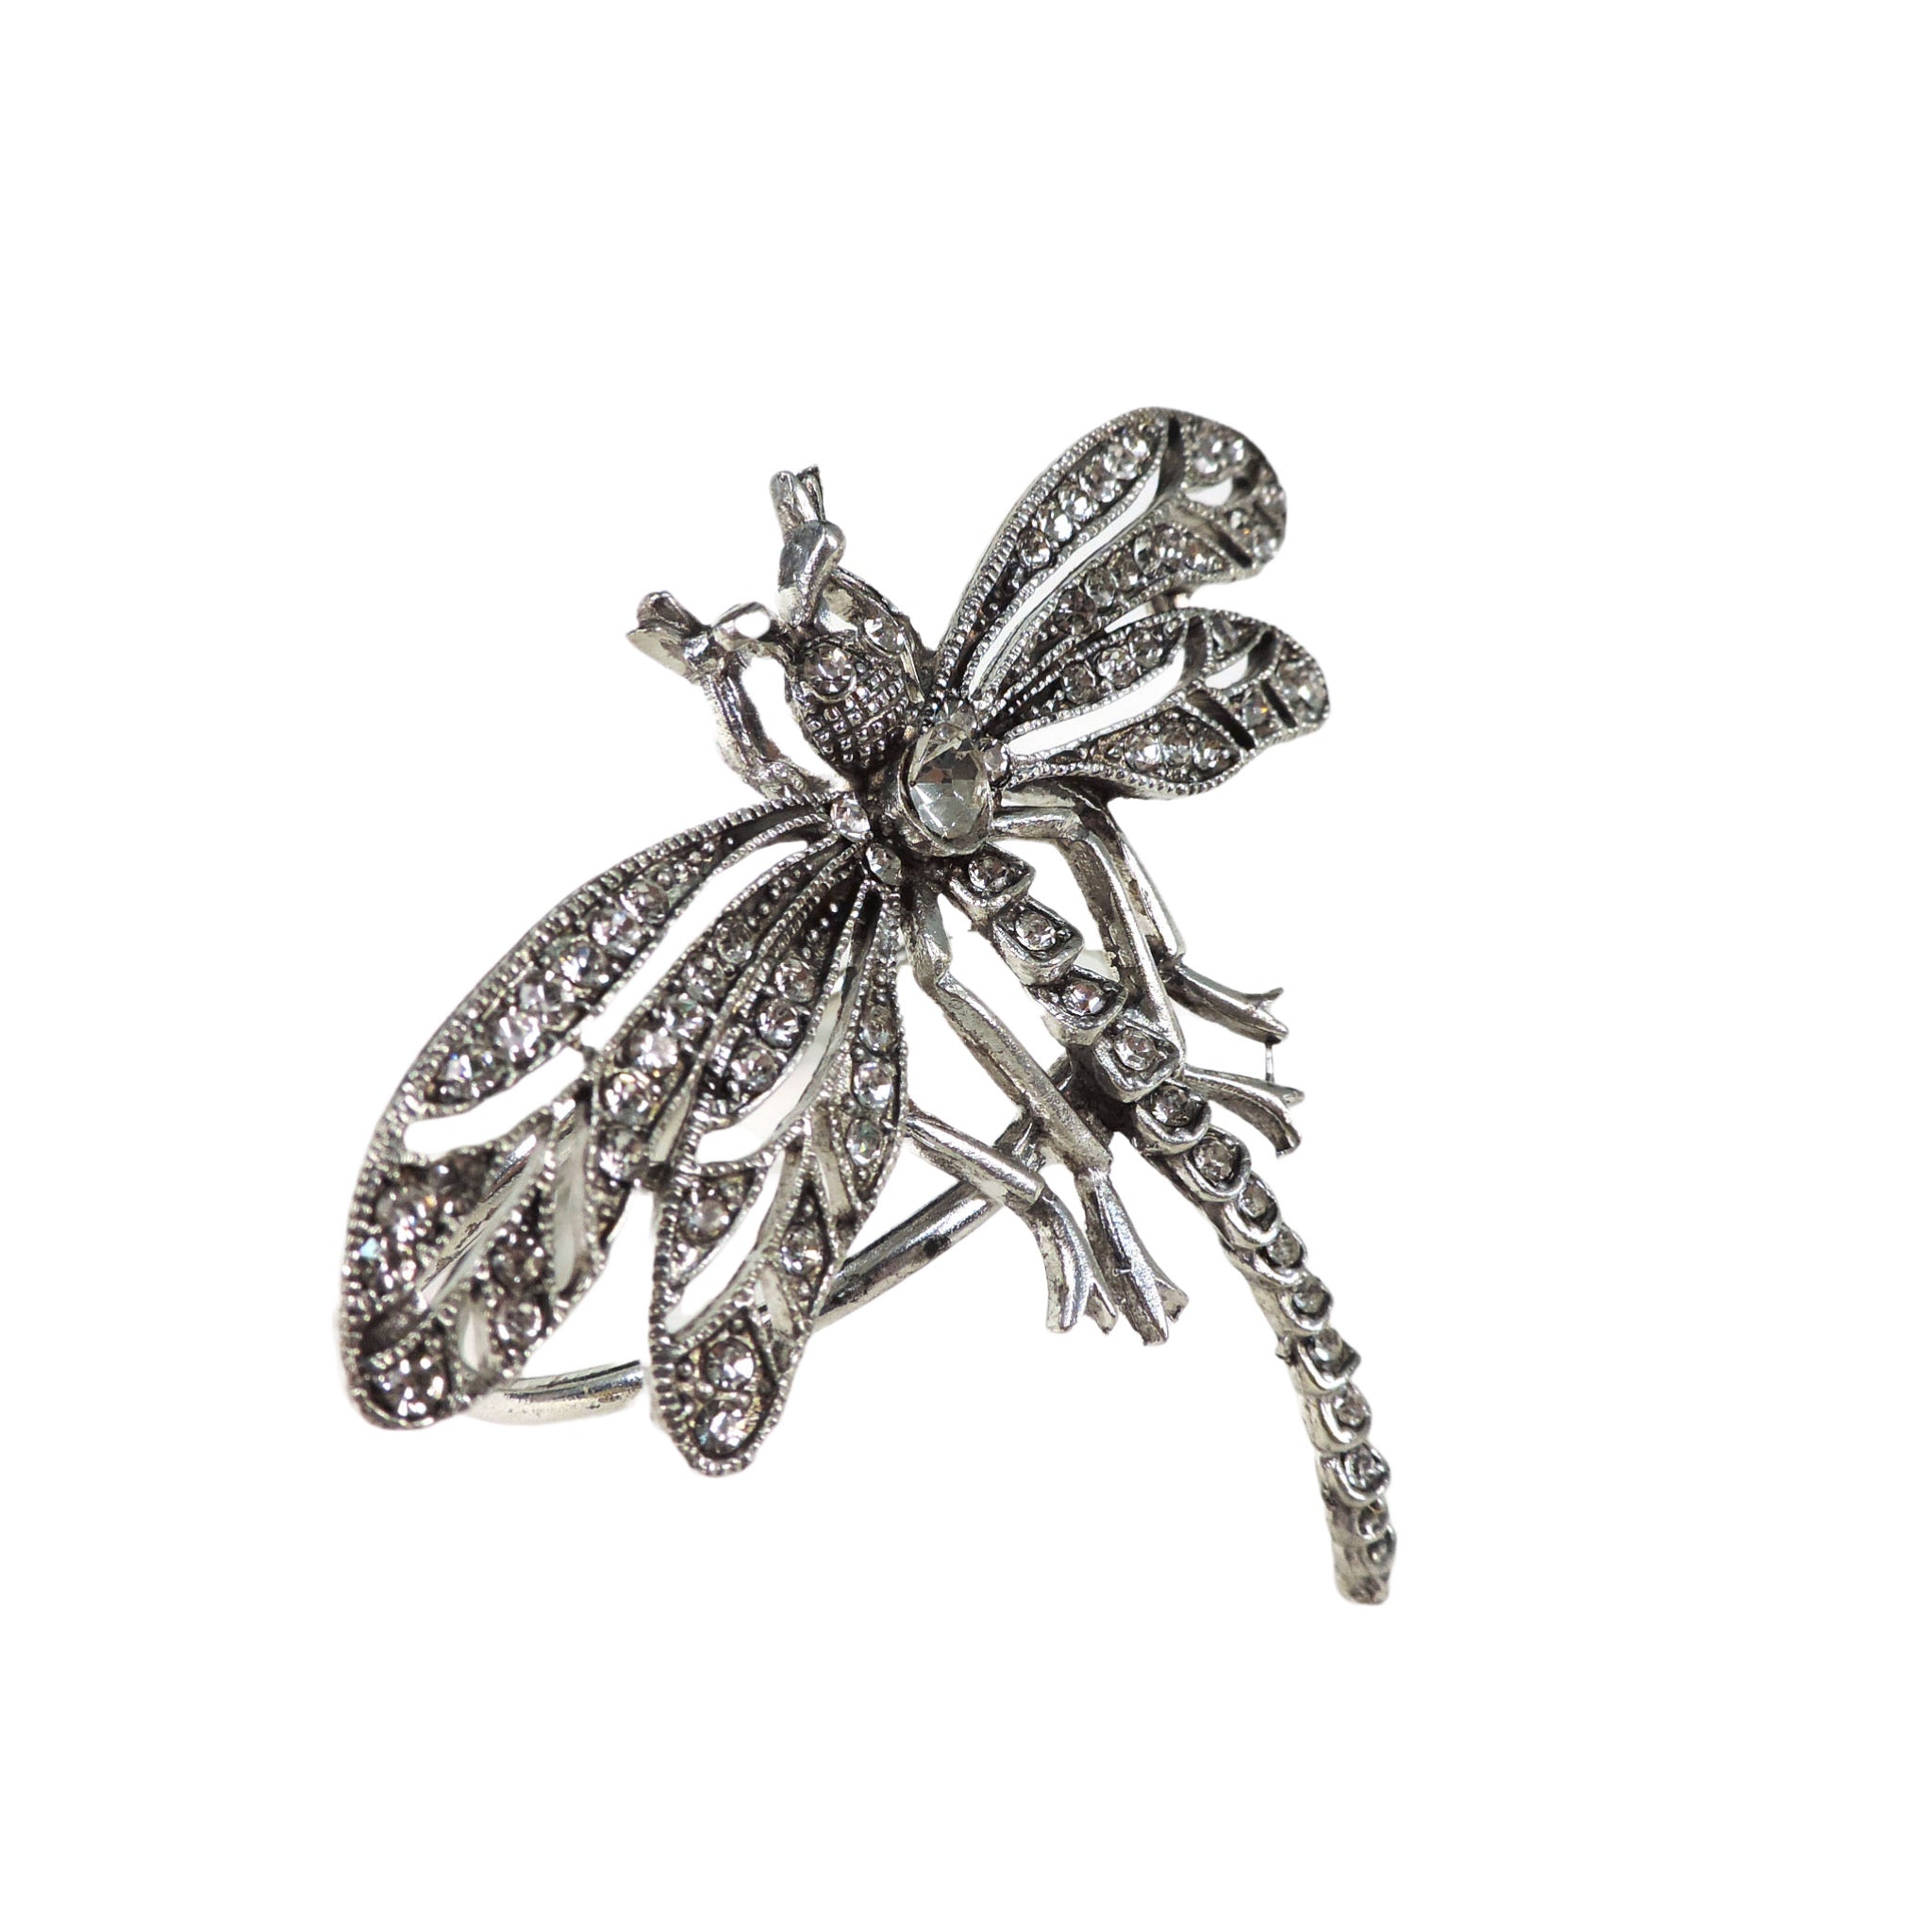 Jeweled Dragonfly Napkin Ring in Silver, Set of 4